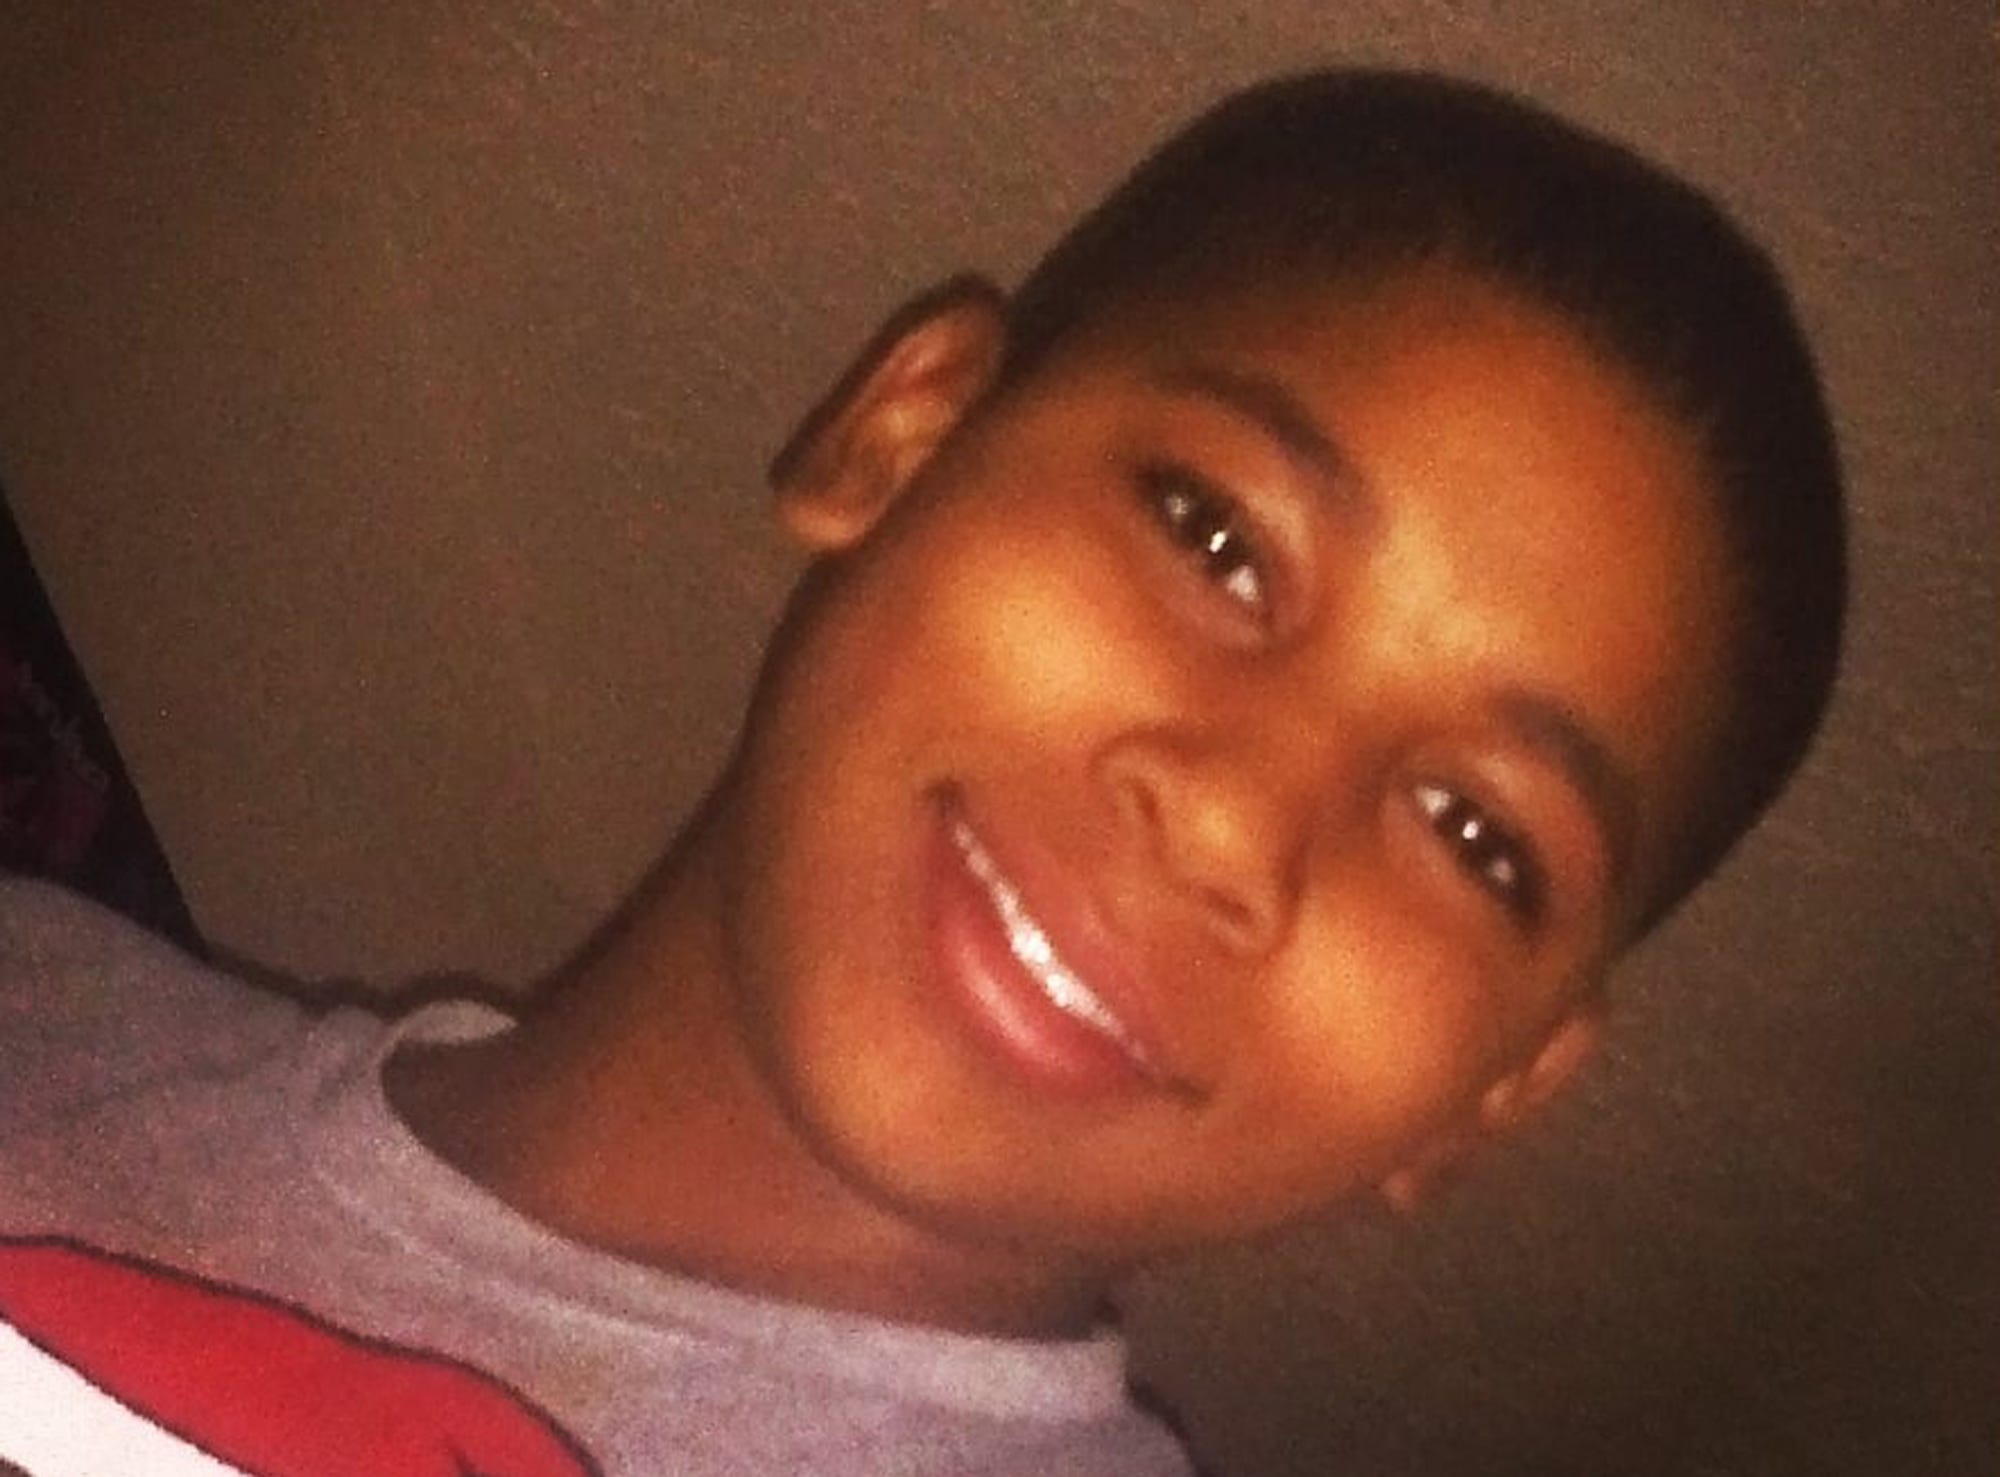 This undated photo provided by the family's attorney shows Tamir Rice. The 12-year-old was fatally shot by police in Cleveland after brandishing what turned out to be a replica gun.